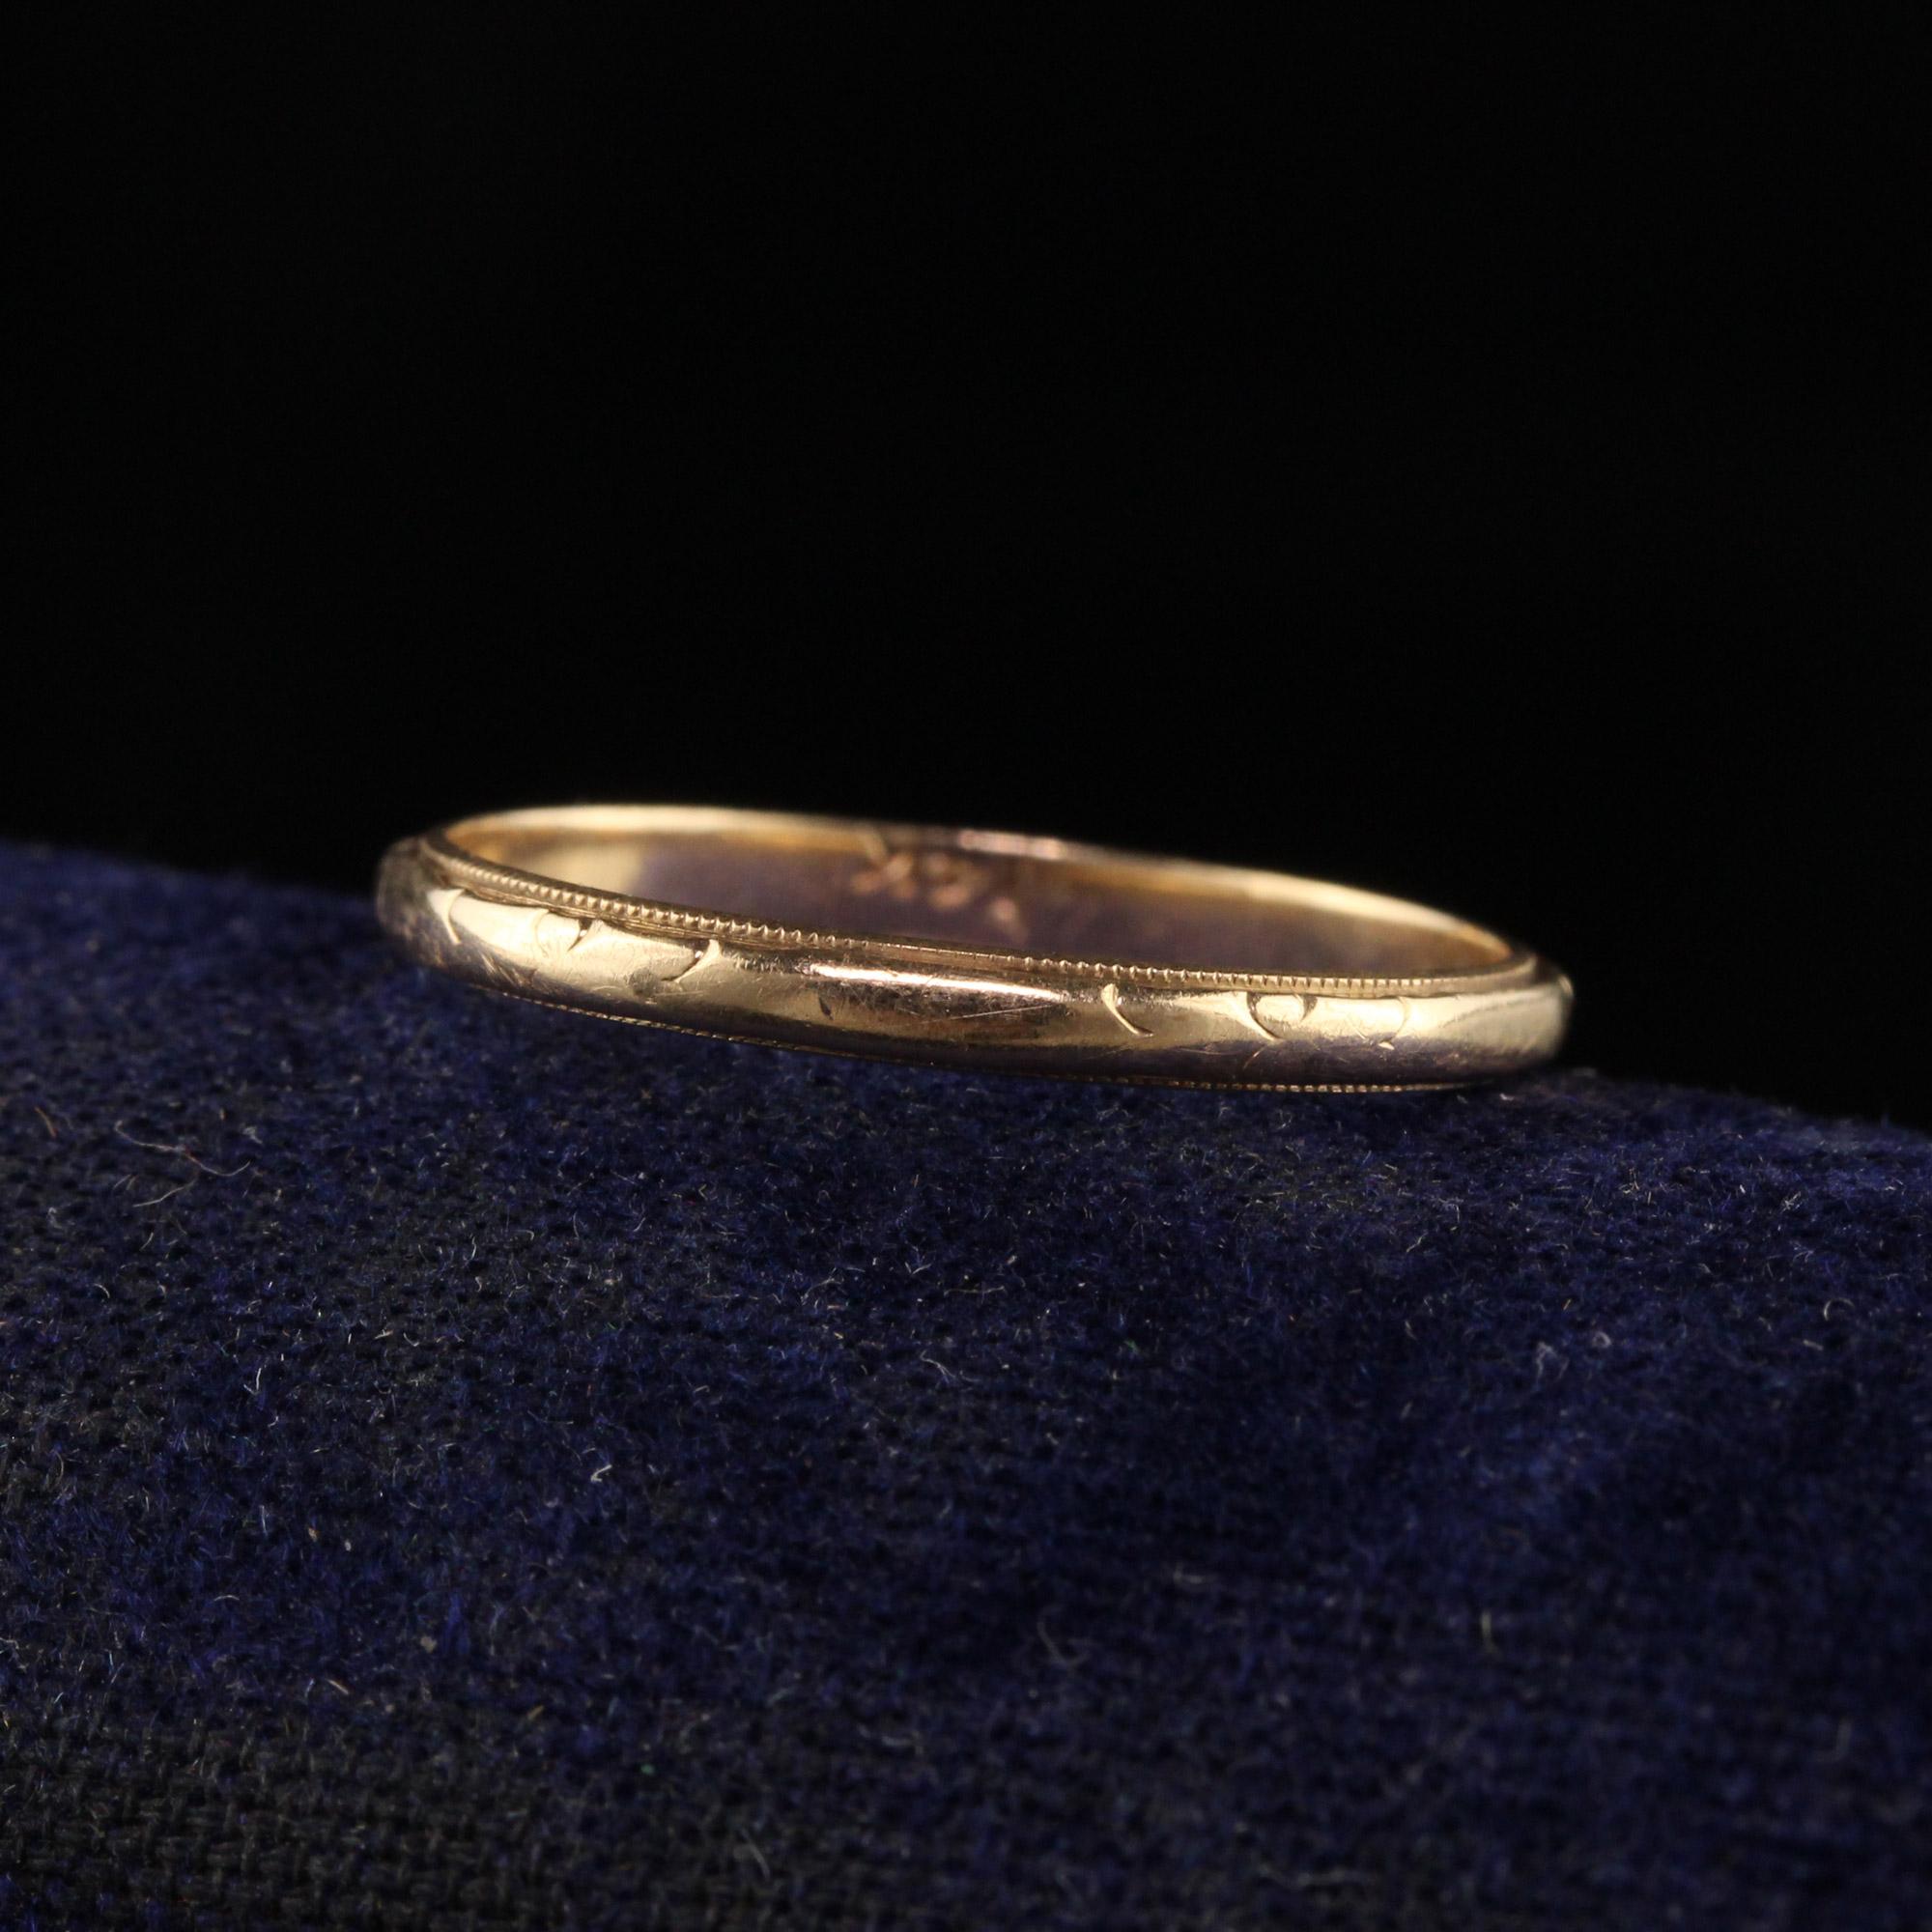 Beautiful Antique Art Deco 14K Yellow Gold Engraved Wedding Band. This beautiful wedding band is crafted in 14k yellow gold. There are faint engravings going around the entire band and it is in good condition.

Item #R1390

Metal: 14K Yellow